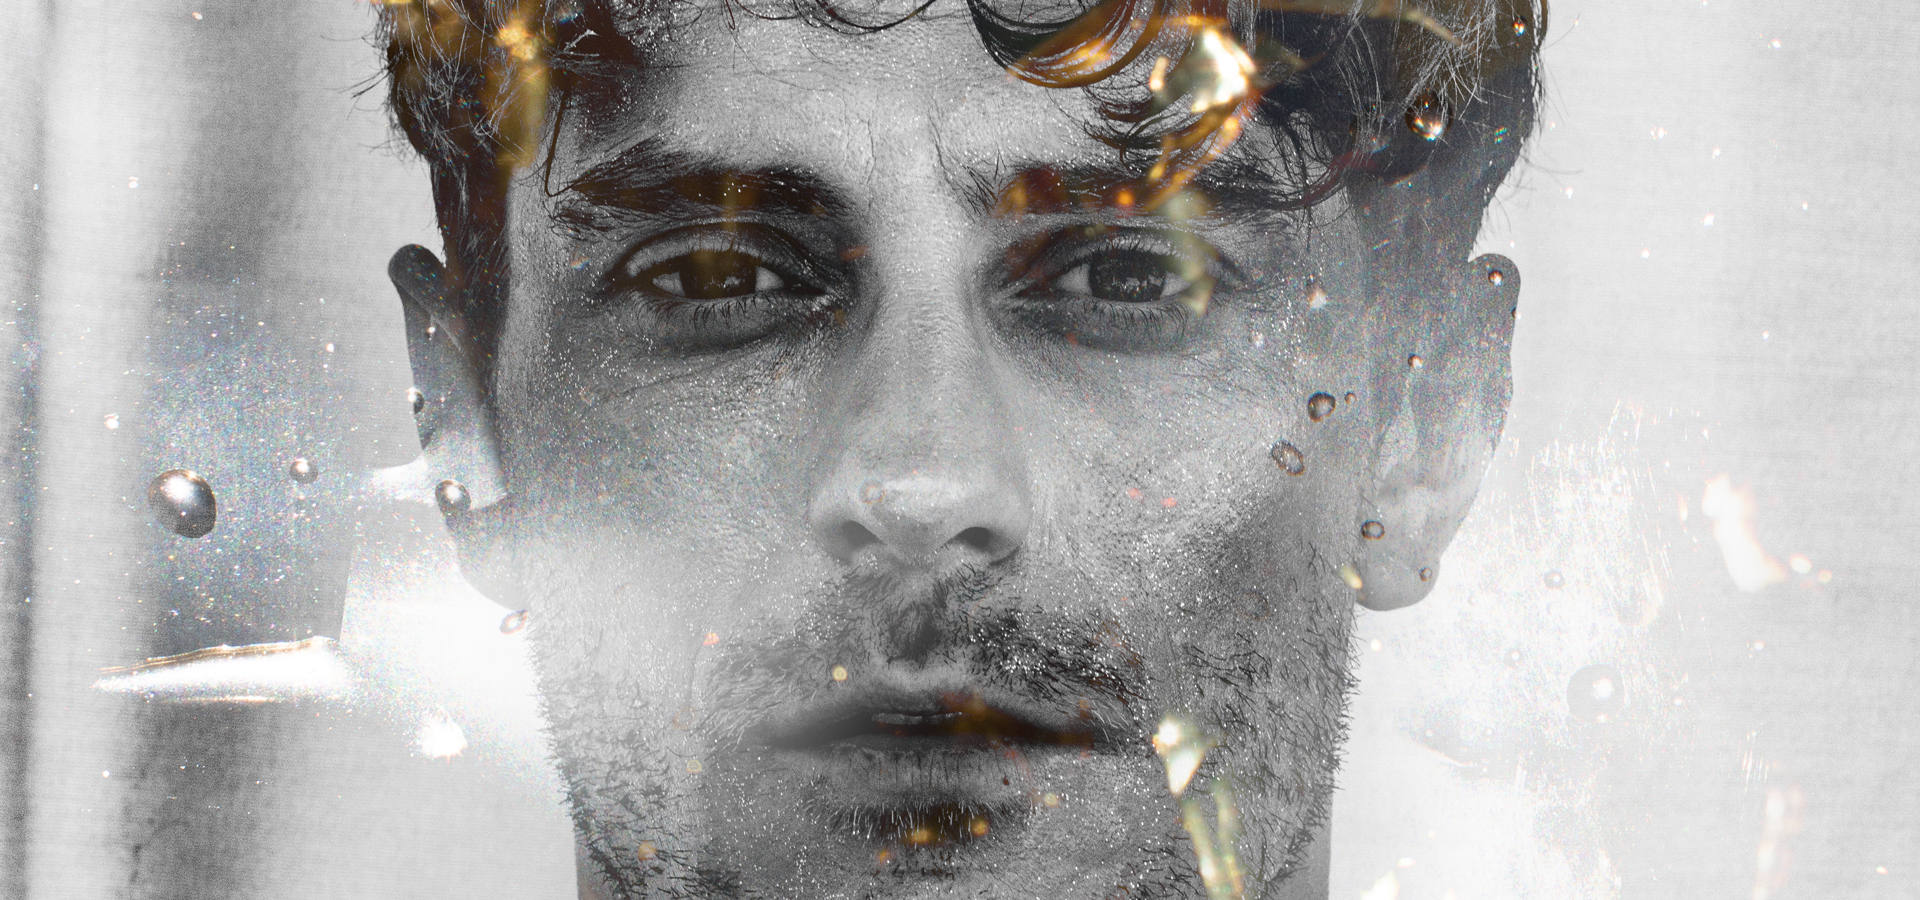 A monochrome photo of Jakub Josef Orlinski’s face, edited with orange sparks as if the image was ignited by flames.